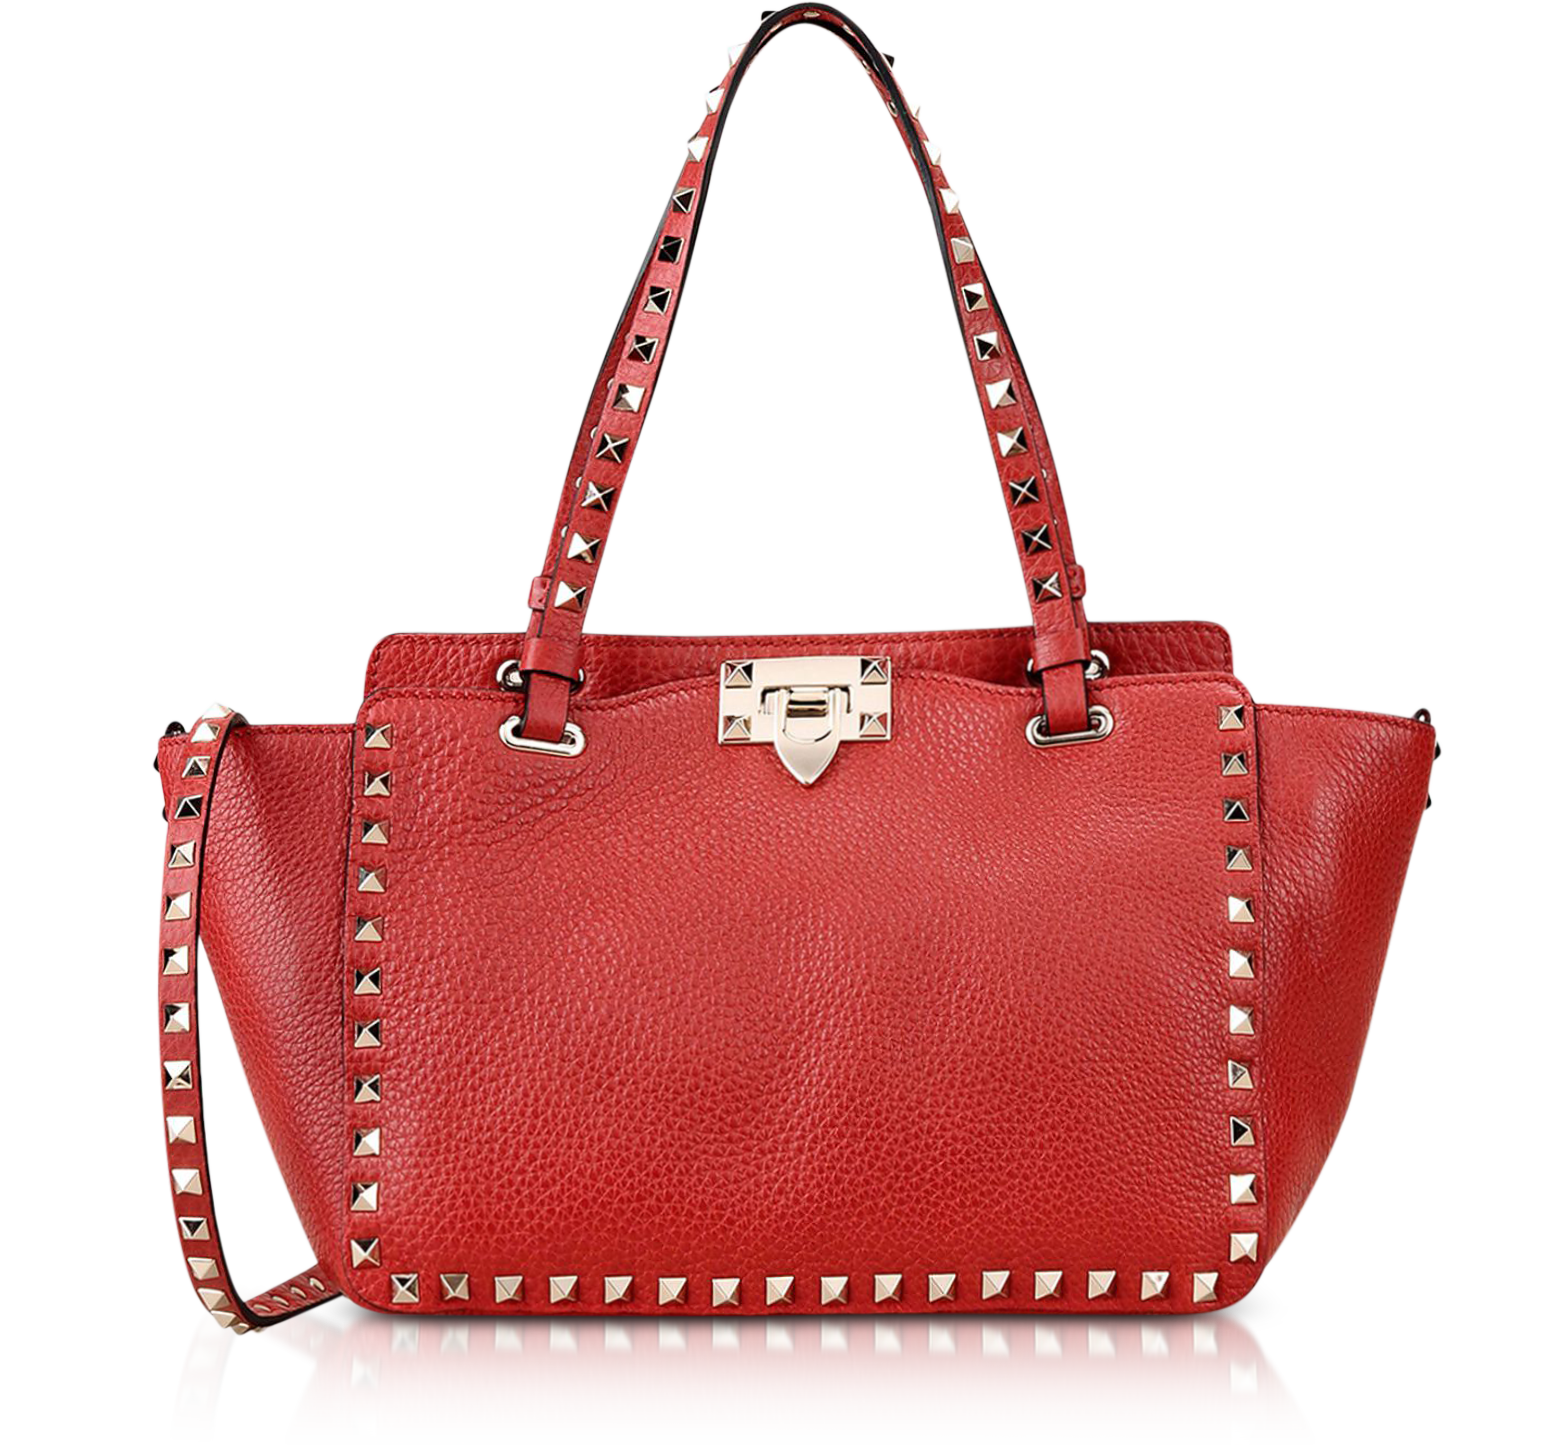 Valentino Red Rockstud Leather Small Bag at FORZIERI